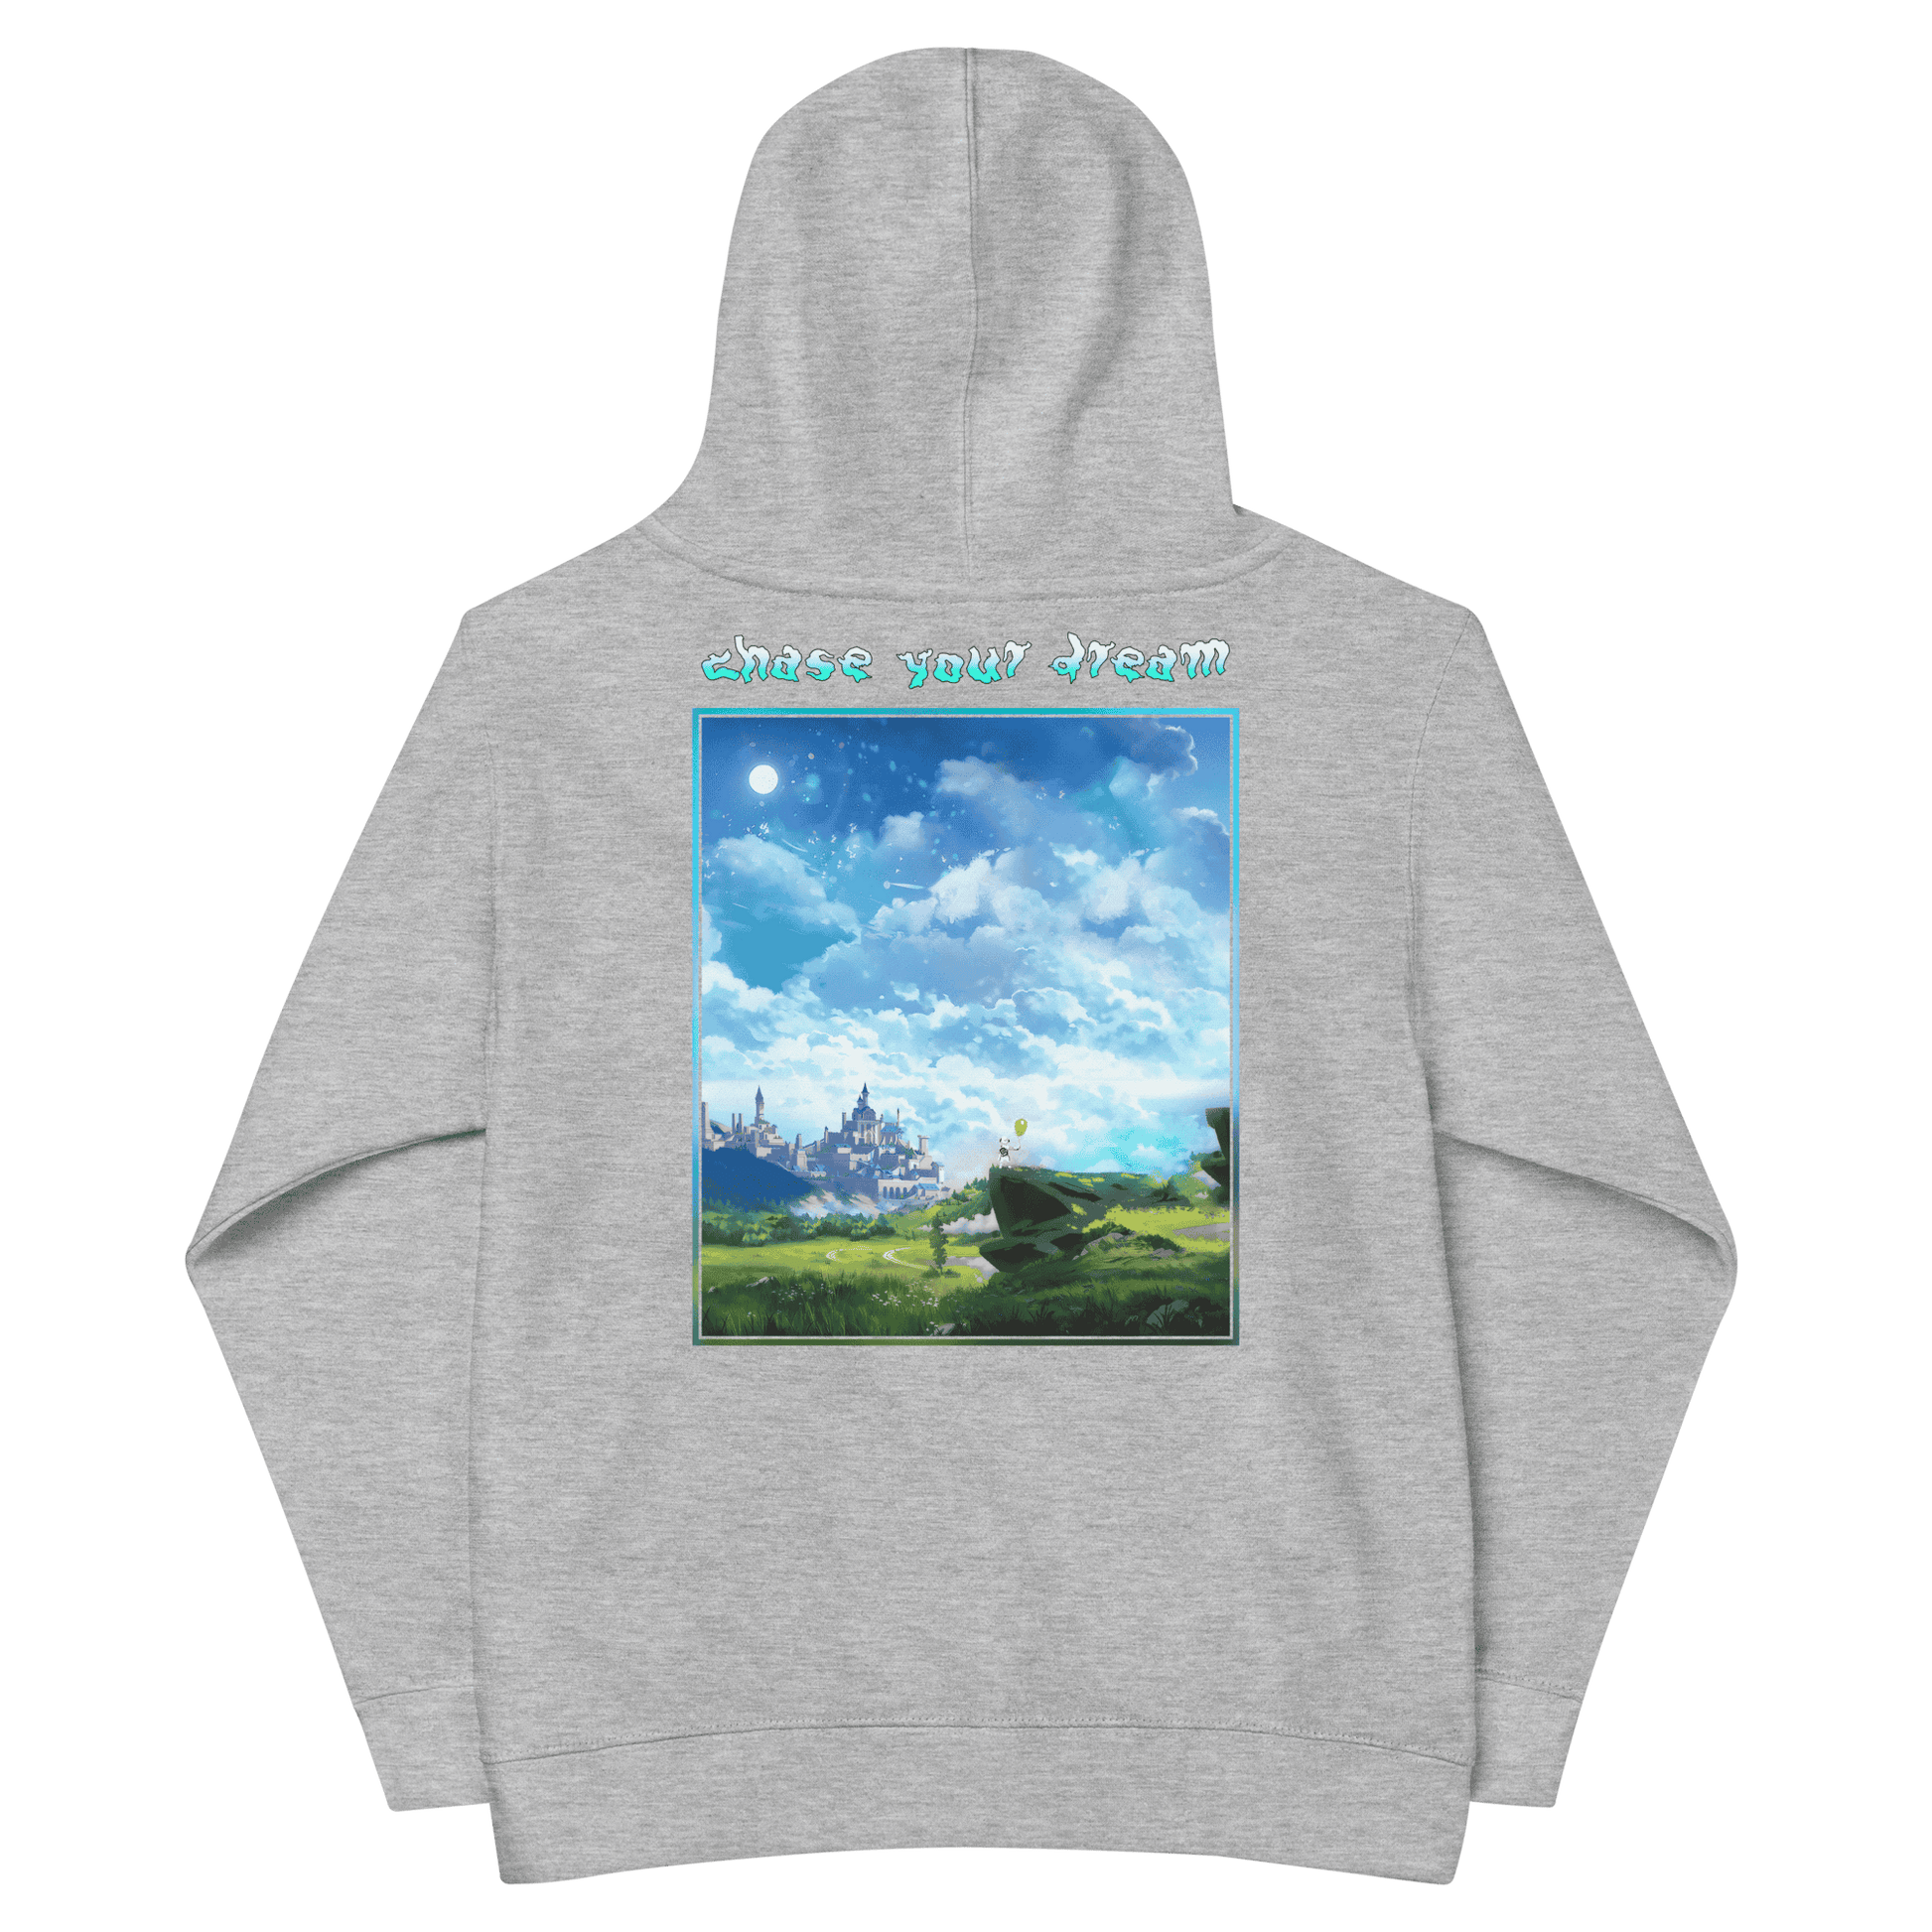 Chase Saldate | Chase Your Dream Youth Hoodie - Clutch - Clothing